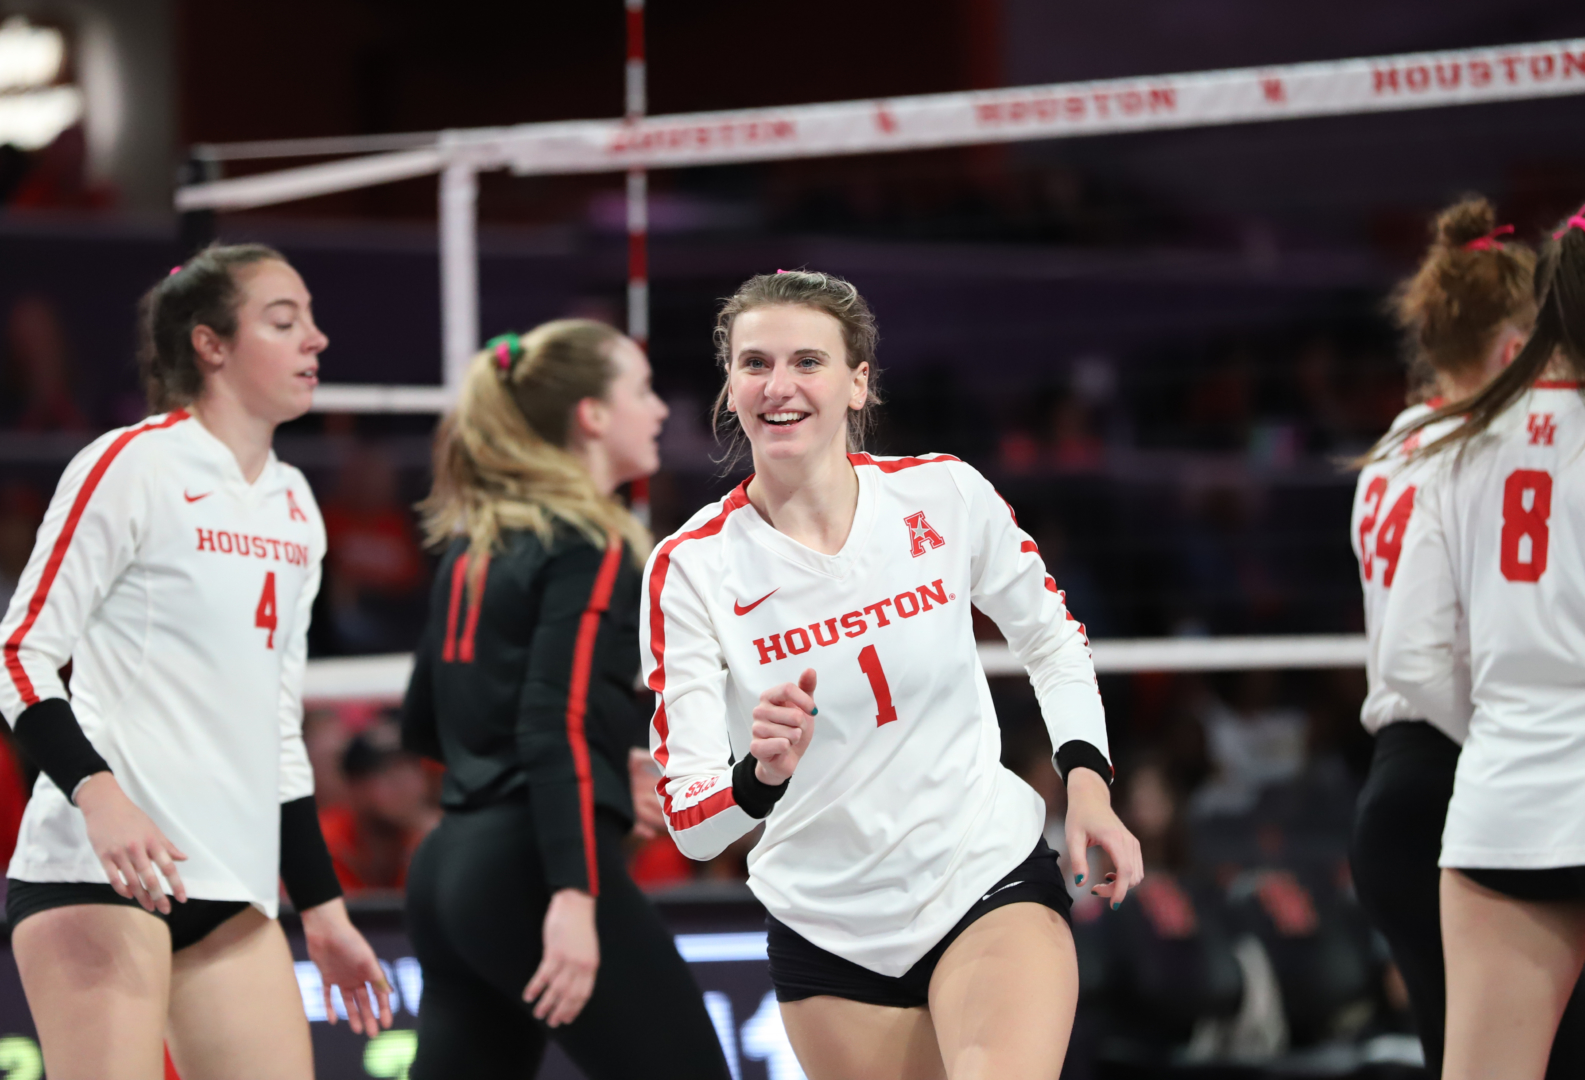 Transferring from Sam Houston, Morgan Janda has found the success she was looking for during her first season at UH. | Sean Thomas/The Cougar